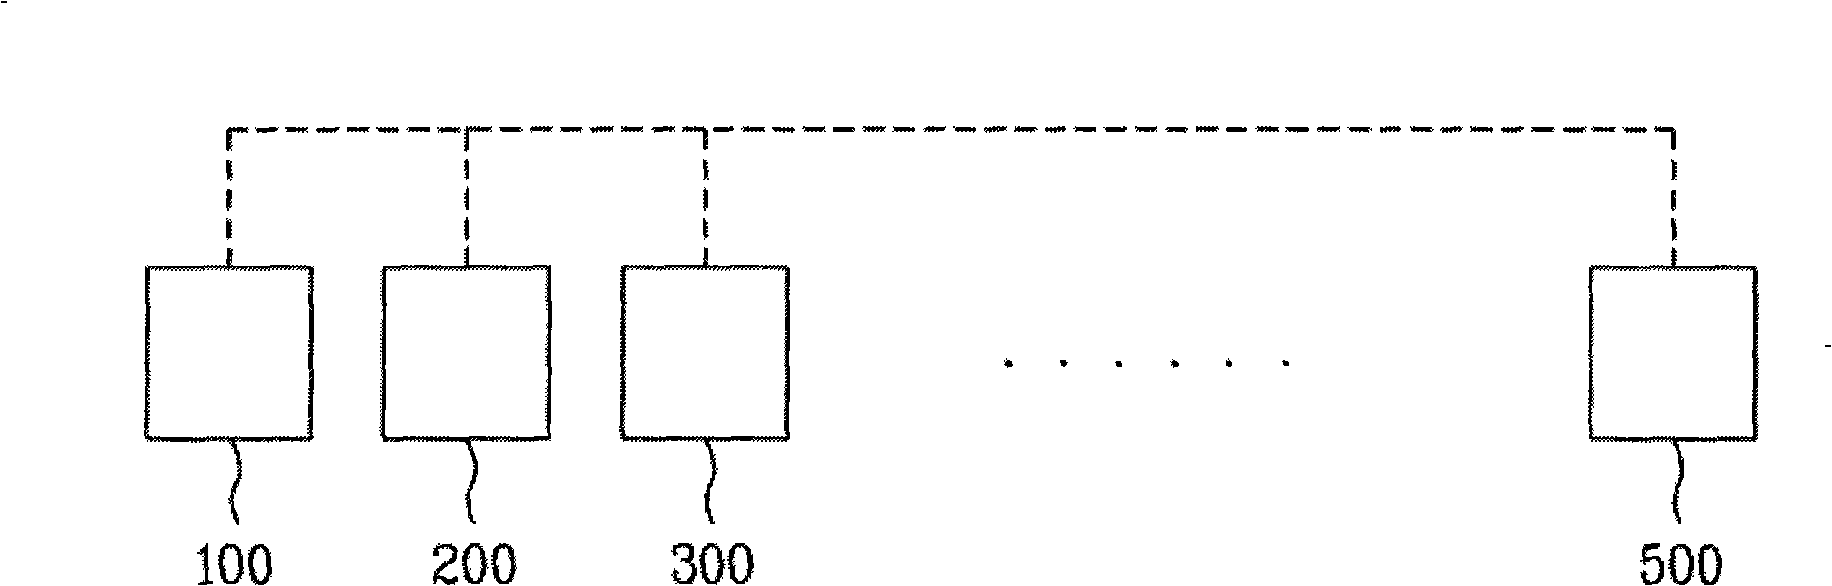 Composite clothing processing system